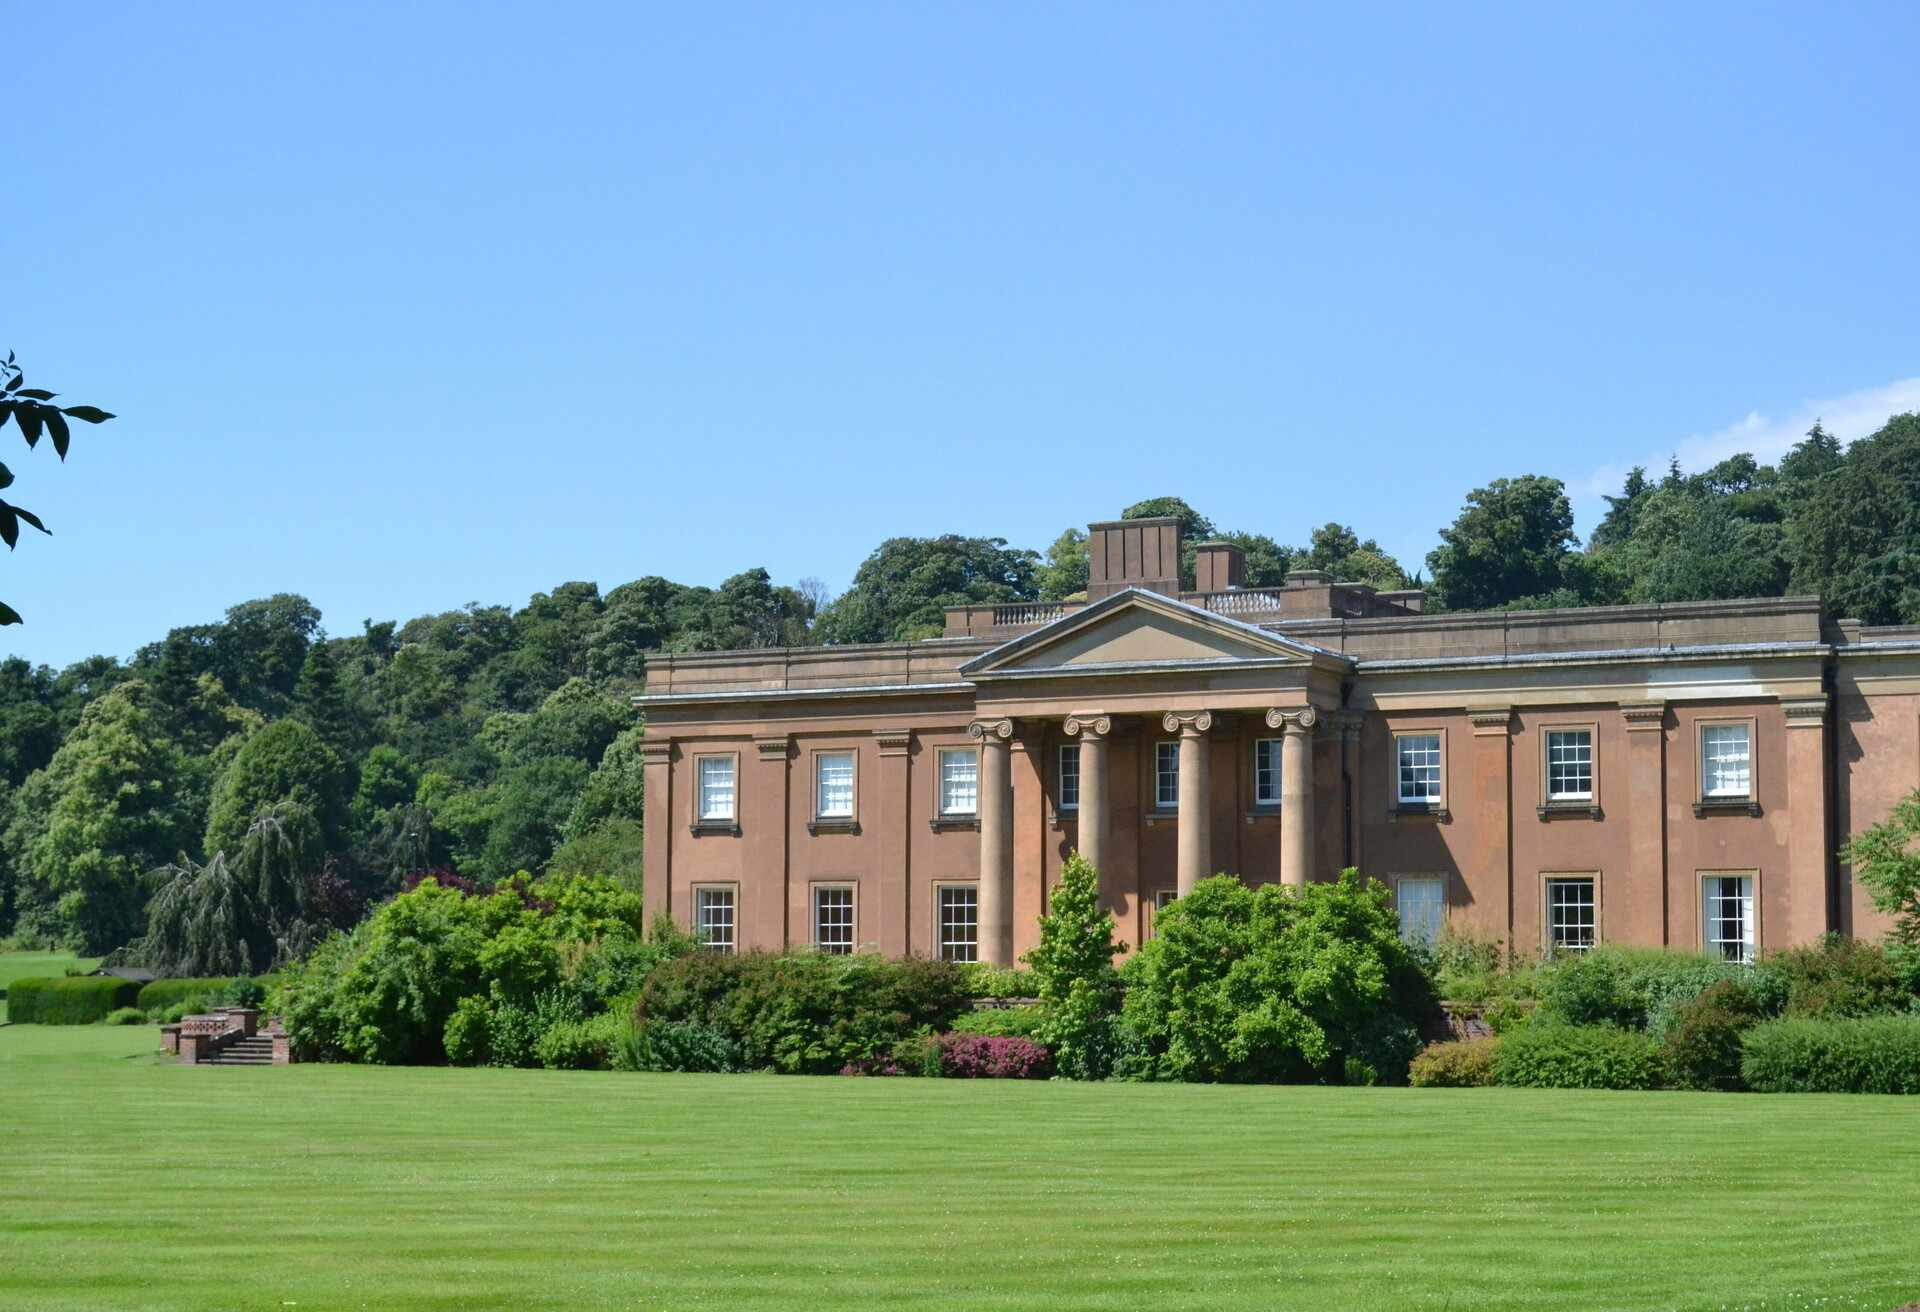 Himley Hall in Dudley, West Midlands on a sunny day; Shutterstock ID 502085251